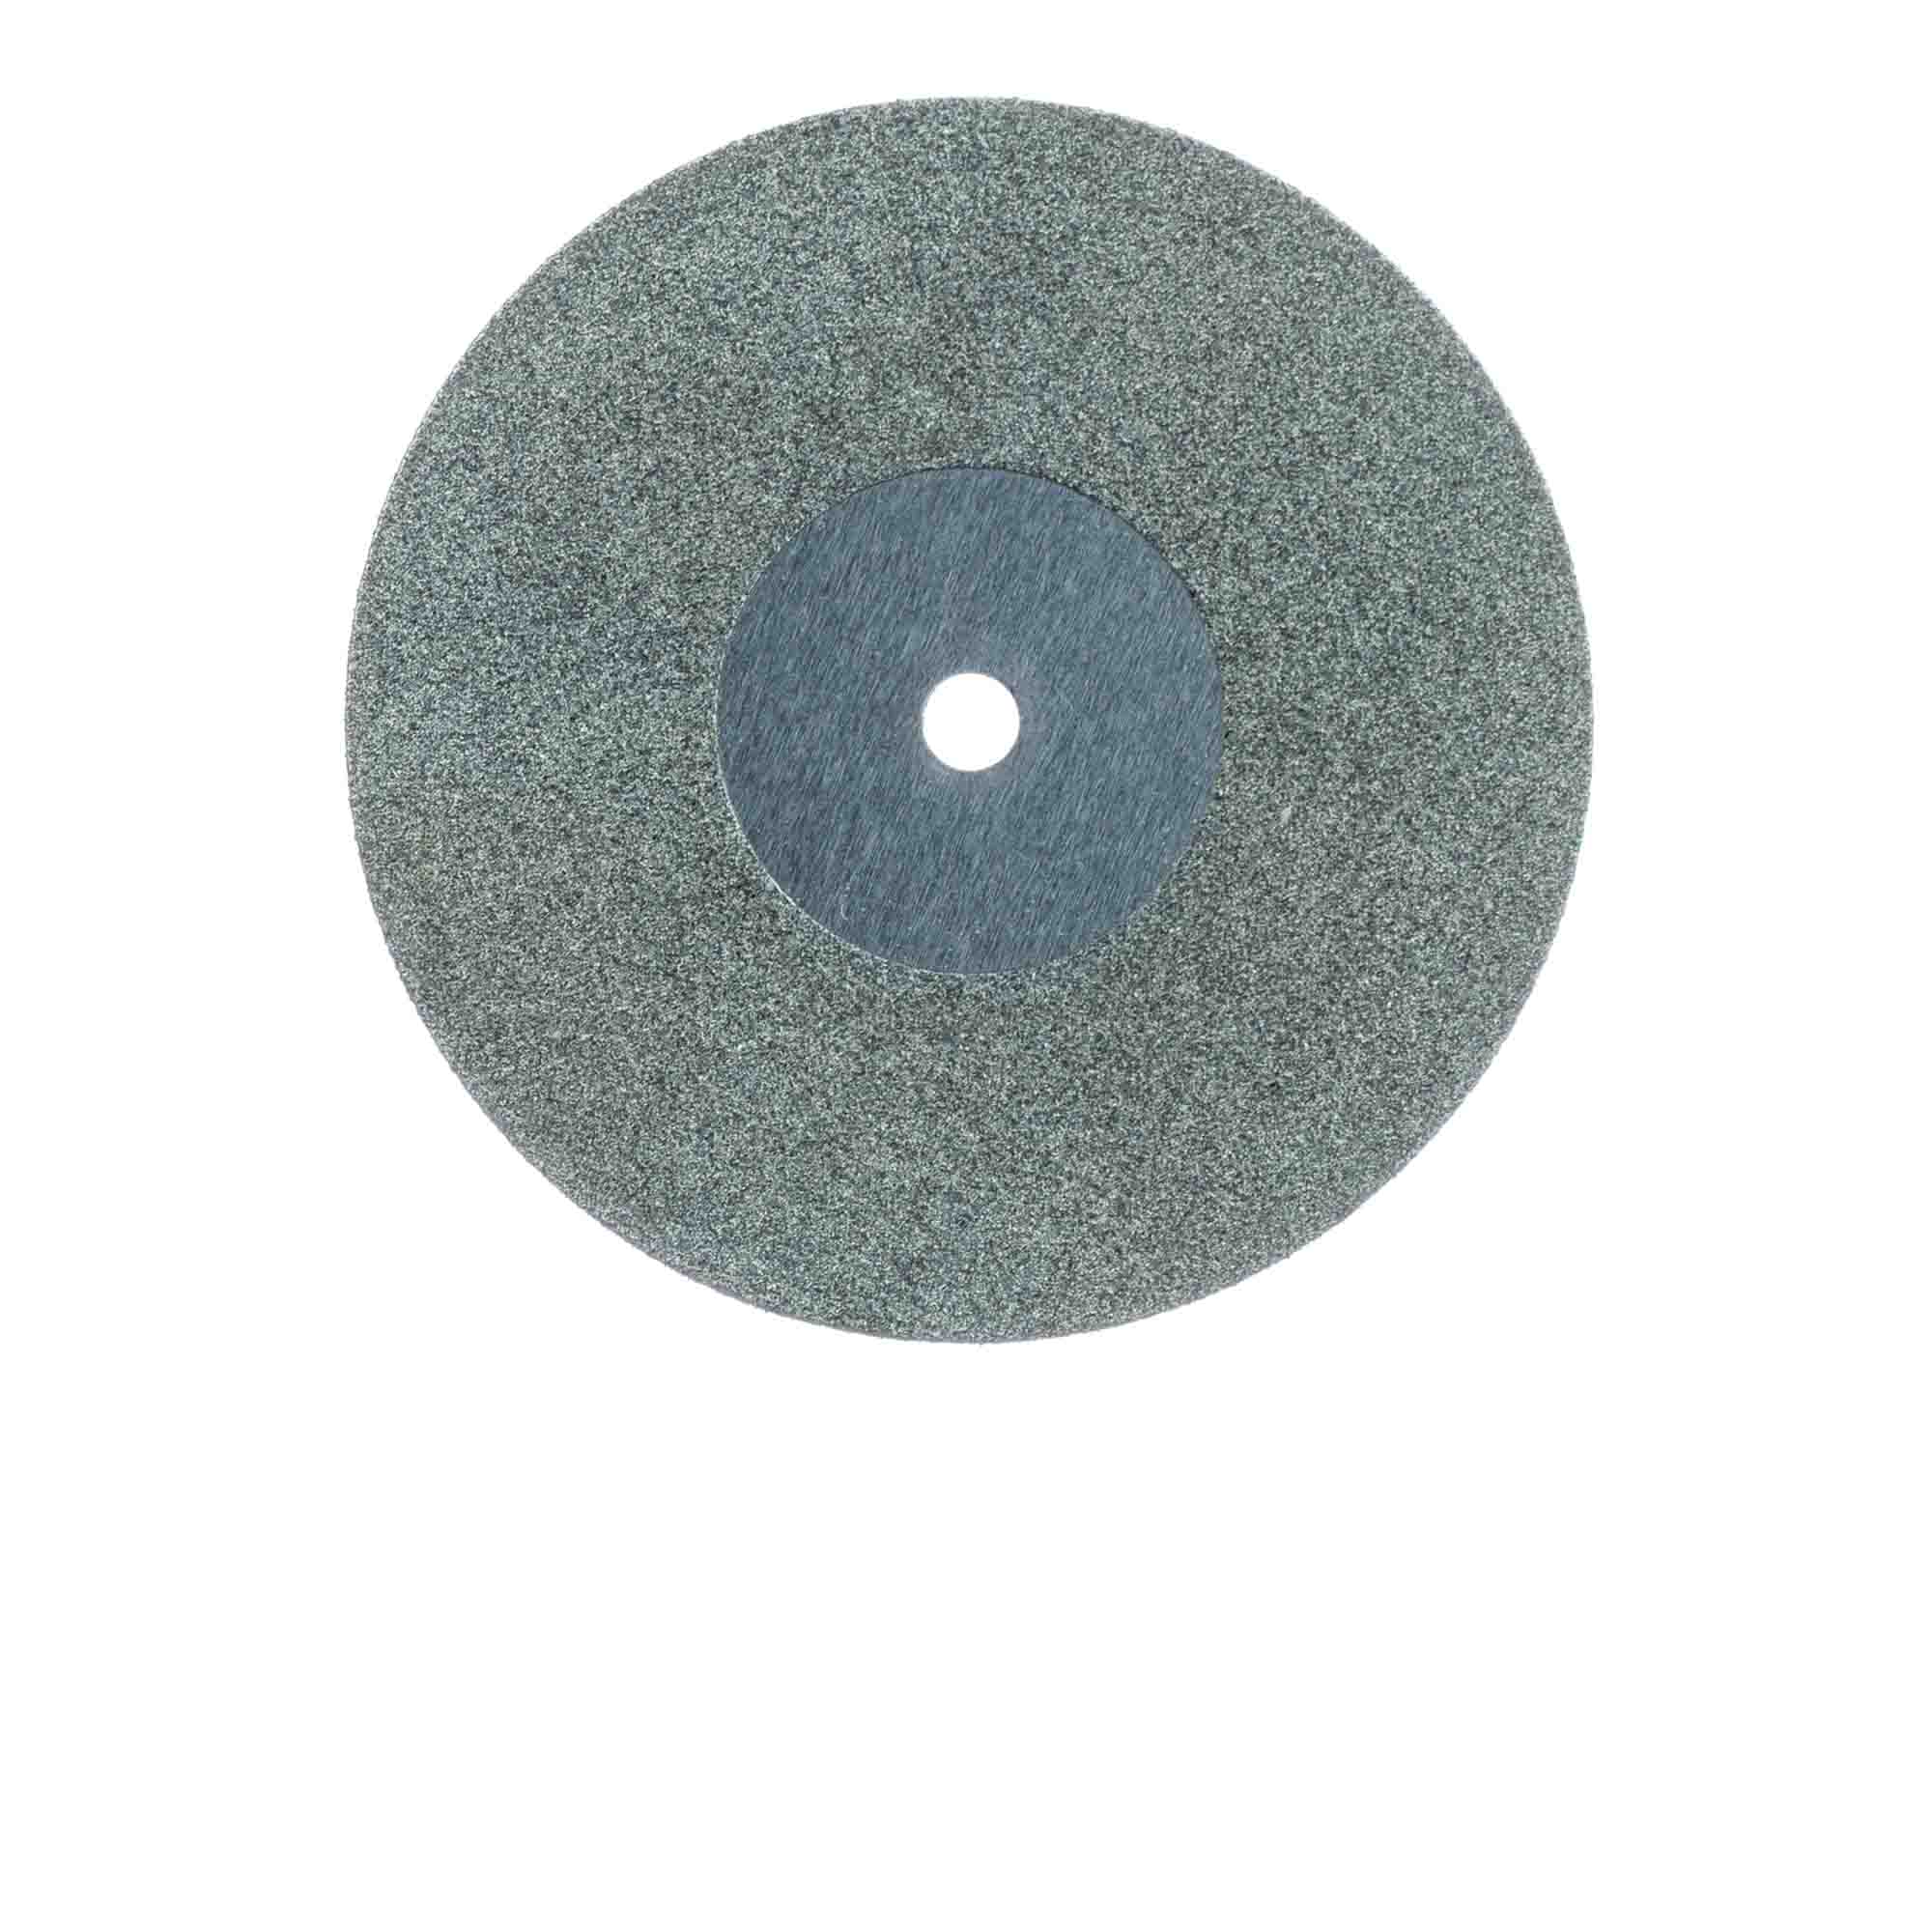 930DF-220-HP Diamond Disc, Double Sided, 0.25mm Thick, 22mm Ø, Fine, HP